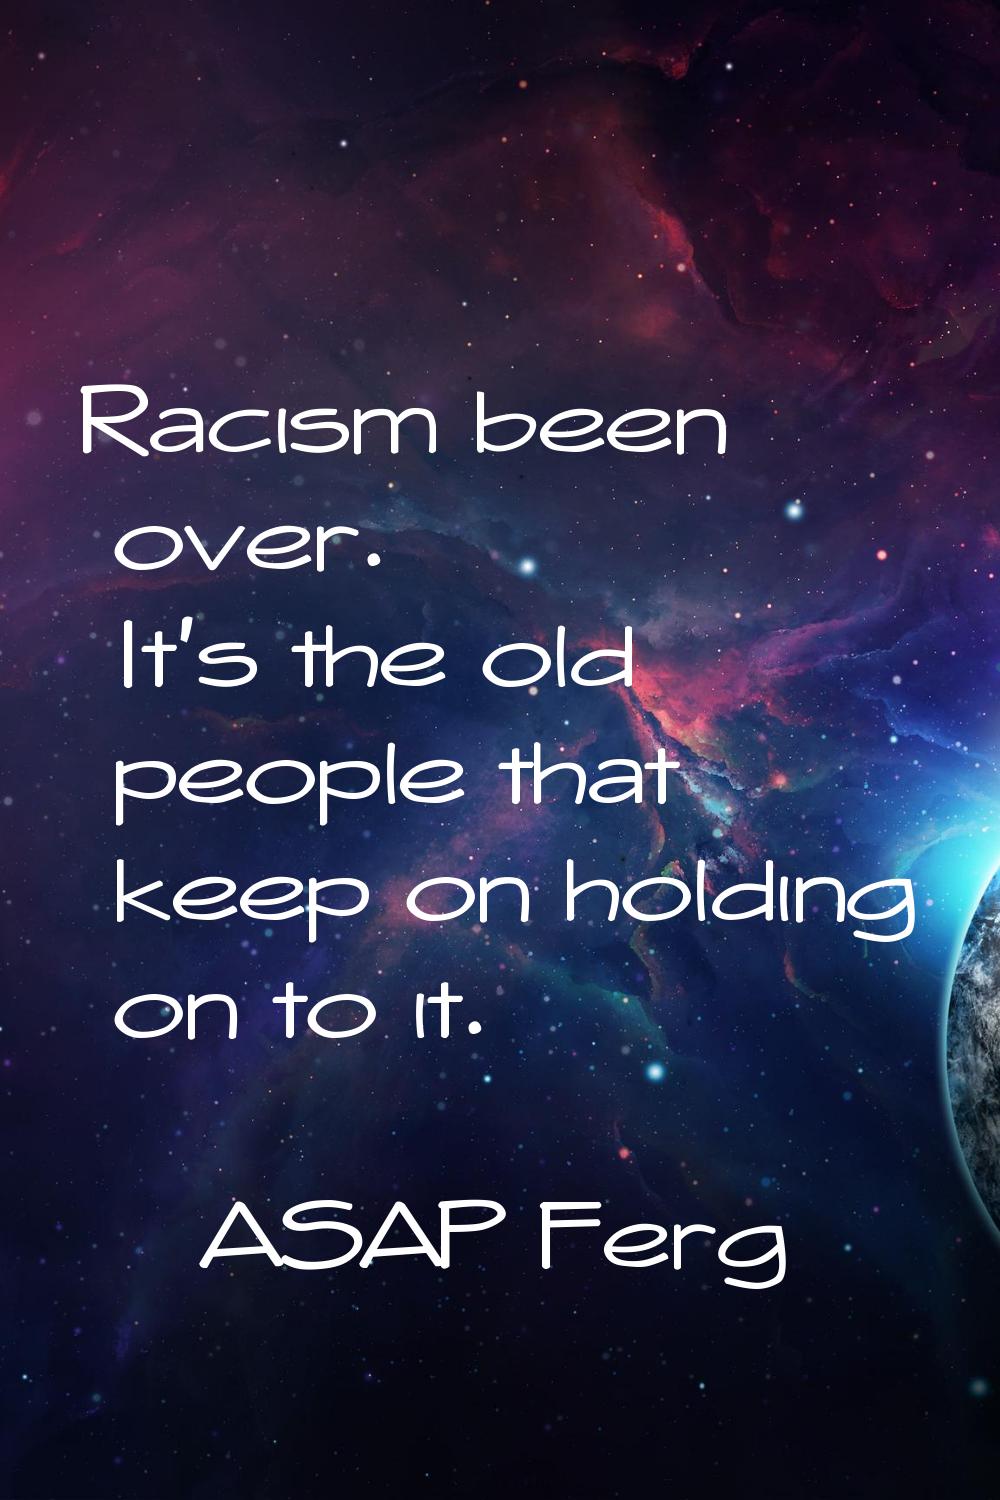 Racism been over. It's the old people that keep on holding on to it.